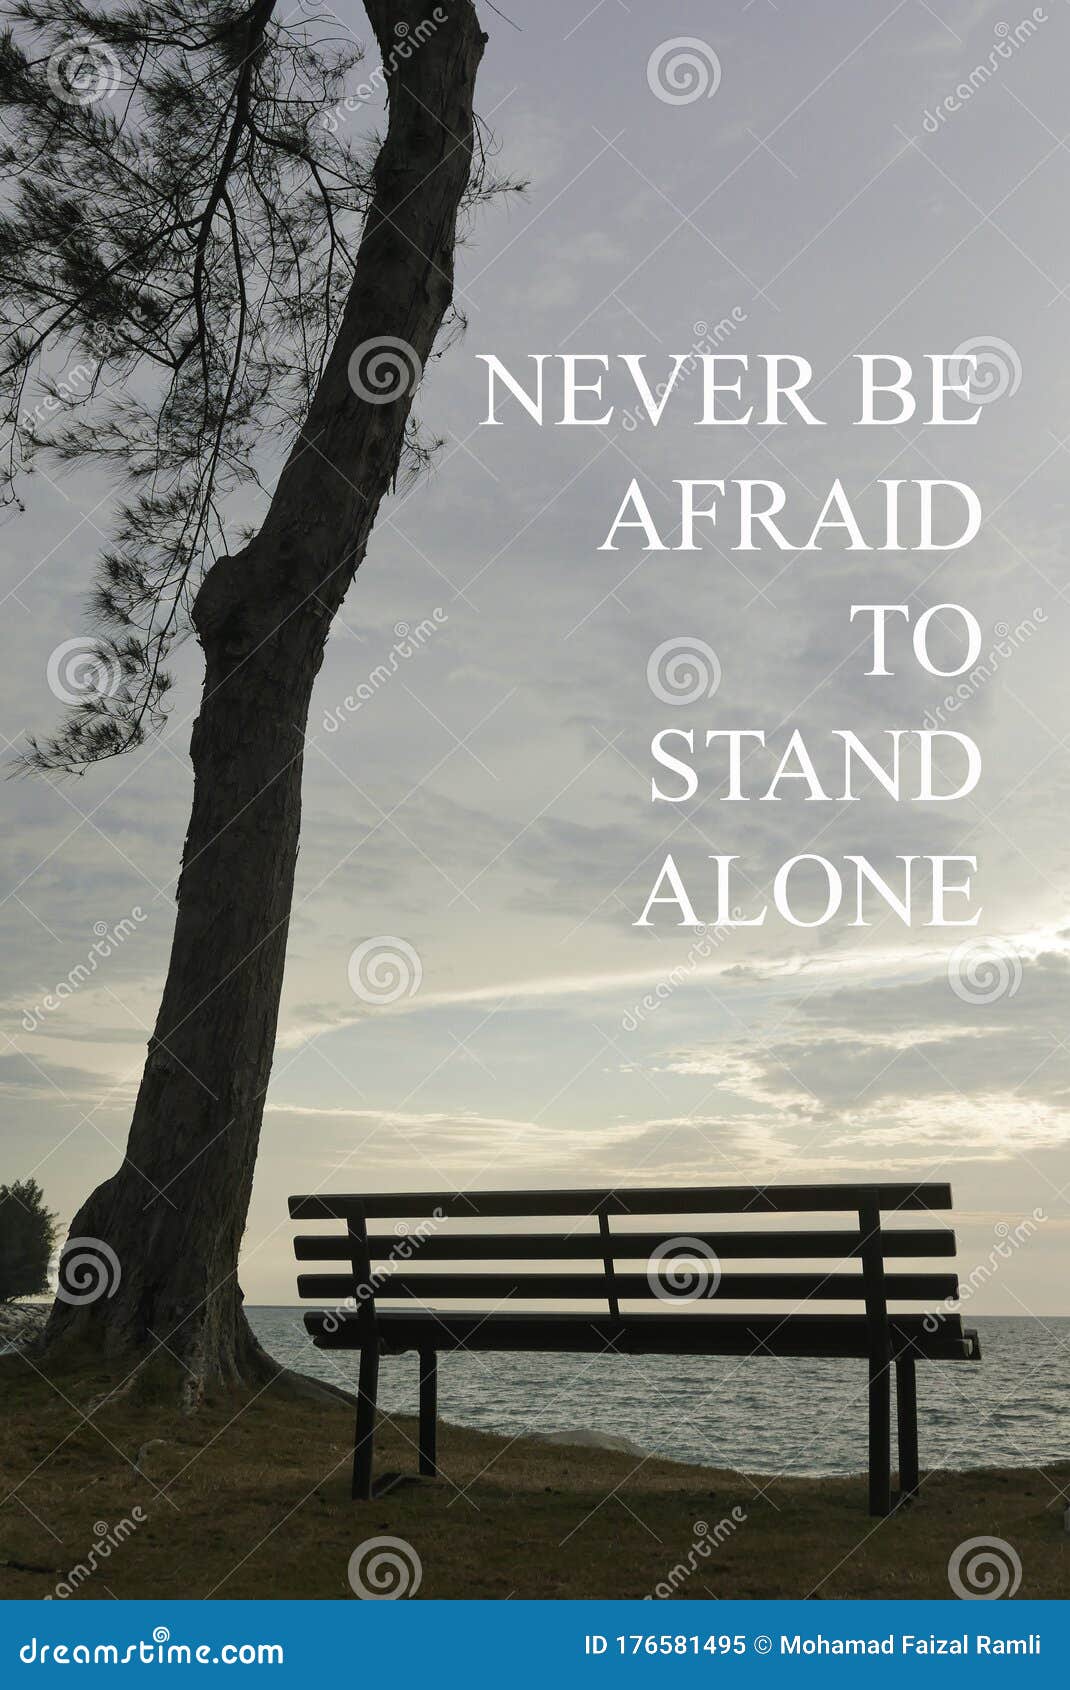 Inspiration Motivational Quotes With Single Bench And A Tree On A Hill During Sunset Never Be Afraid To Stand Alone Stock Image Image Of Motivation